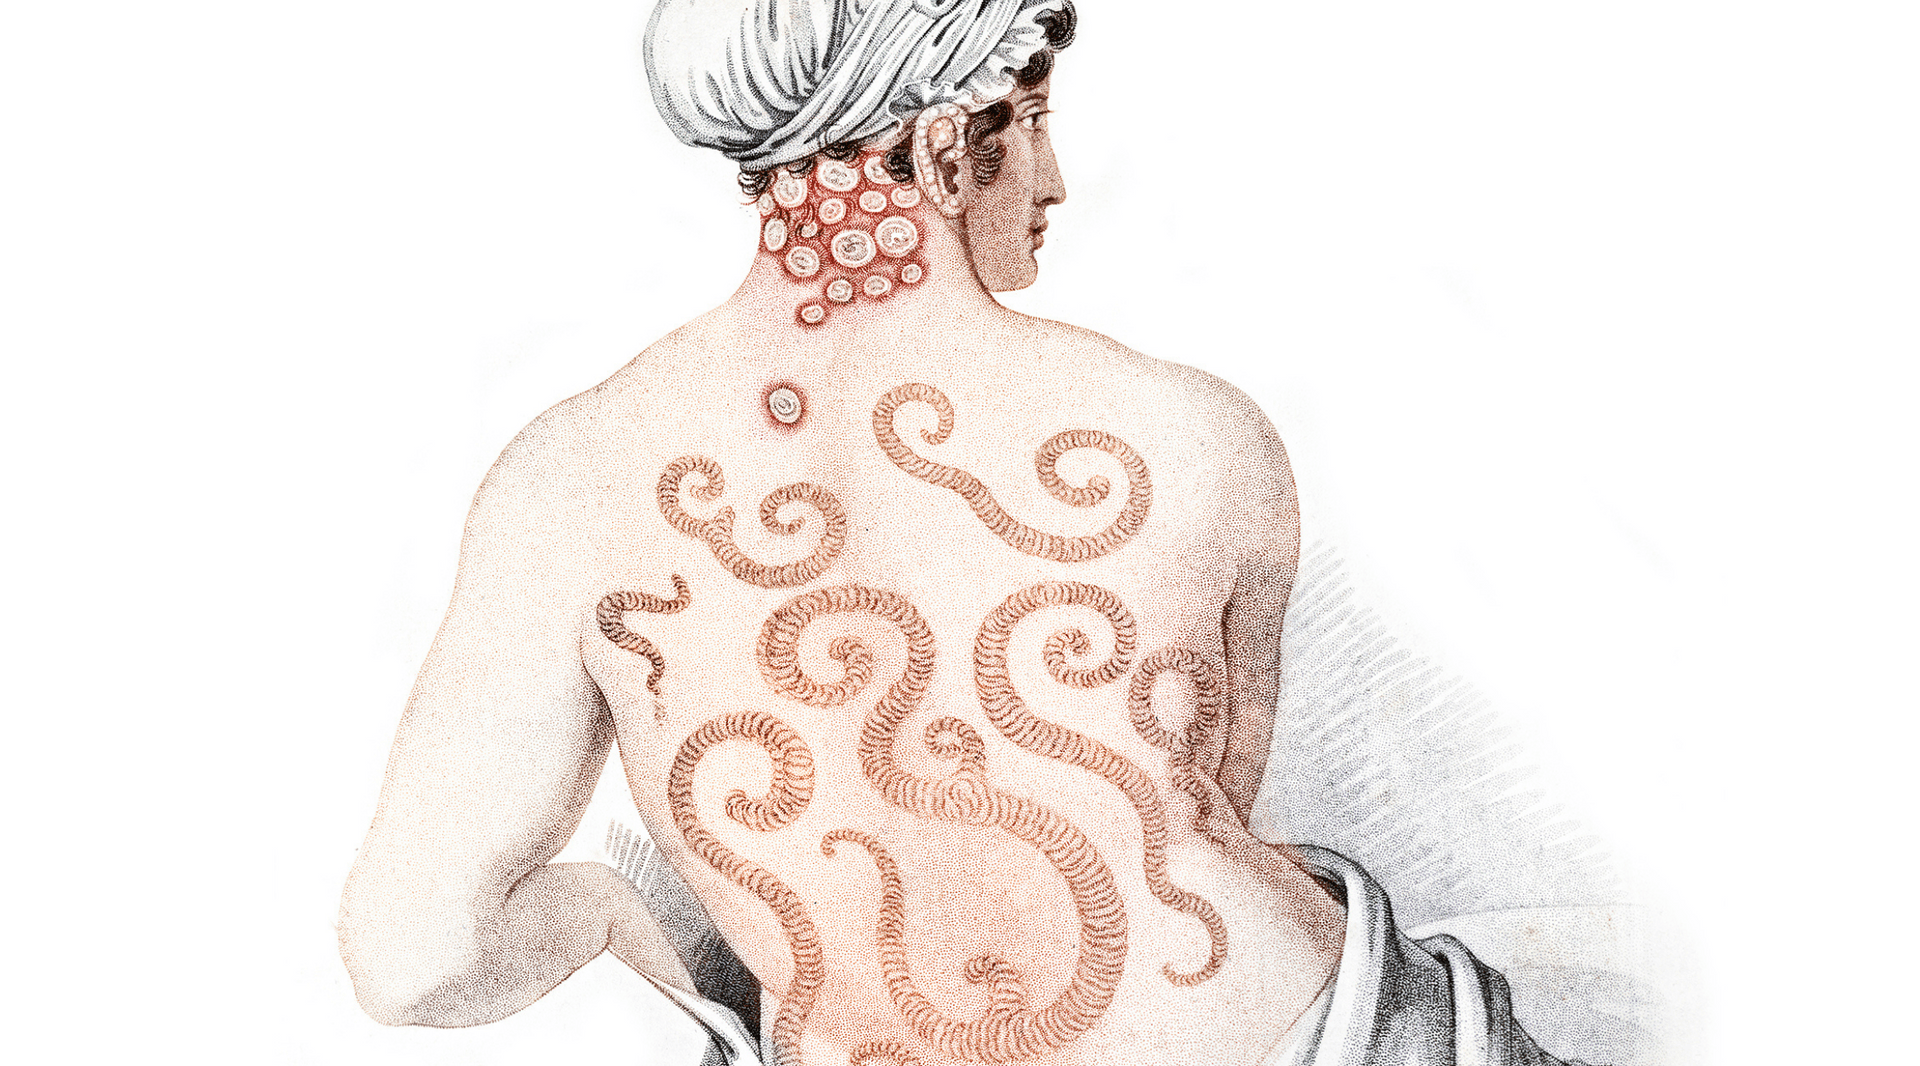 Illustration of woman with clothing pulled down to reveal red and brown swirls on her back